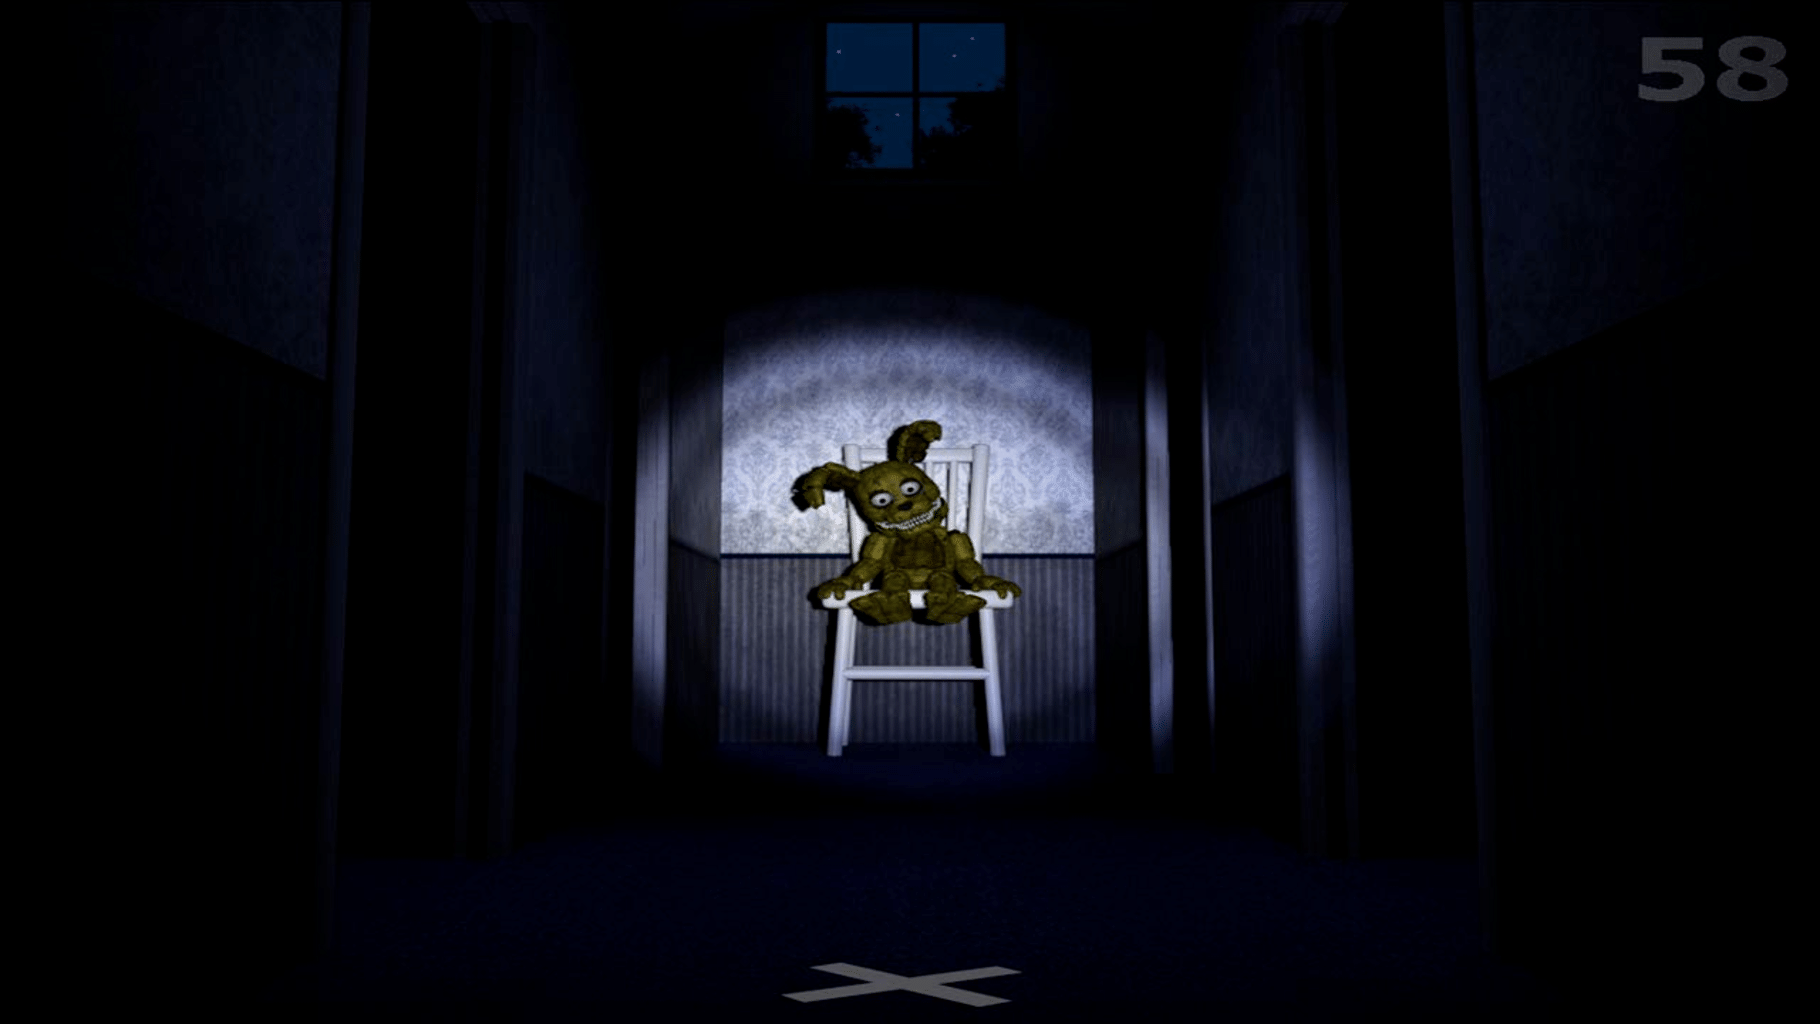 Backlog Review: Difficulty vs. Fear – Five Nights at Freddy's 2